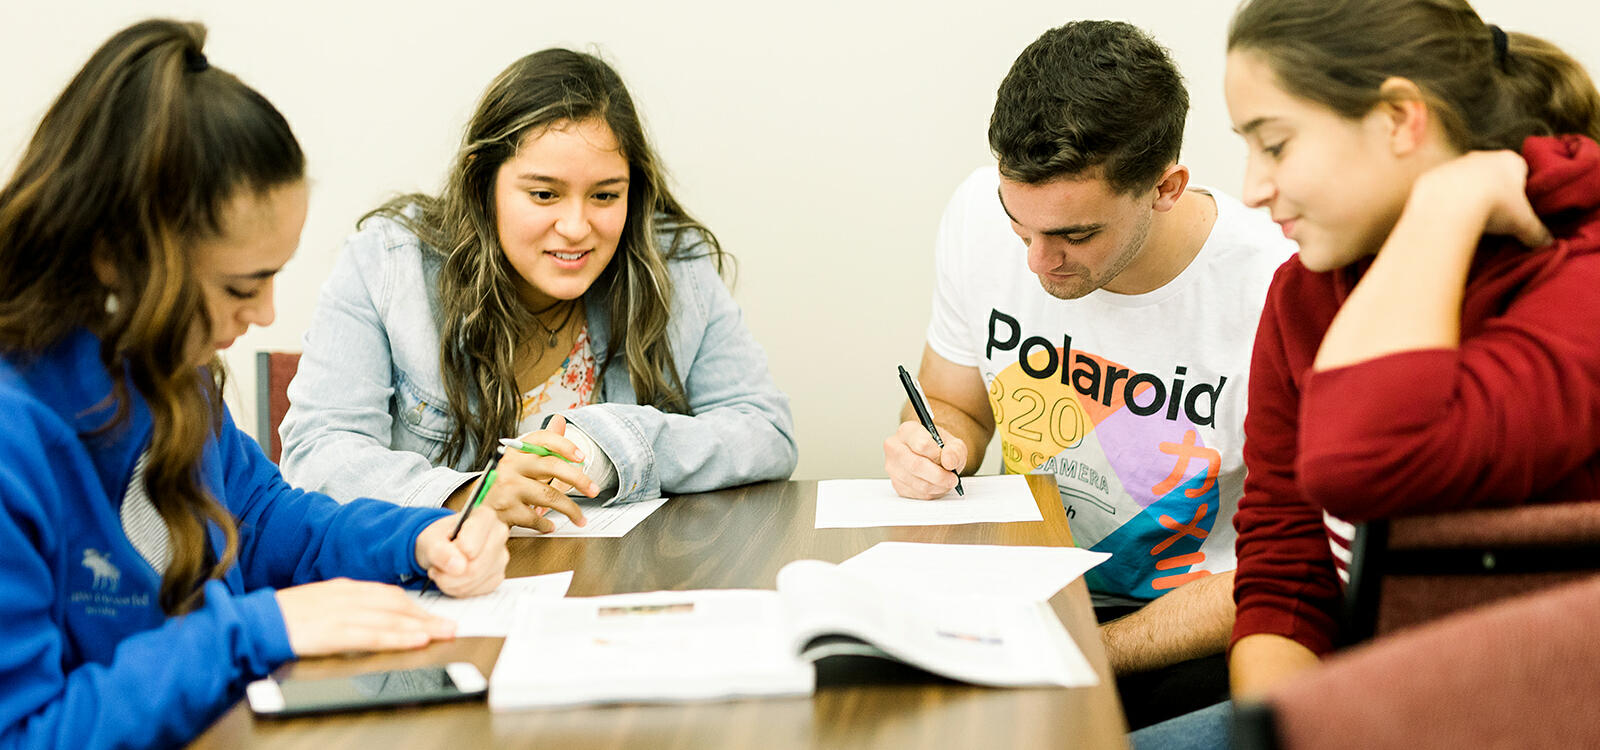 Four students sit together at a table and do assignments and study together